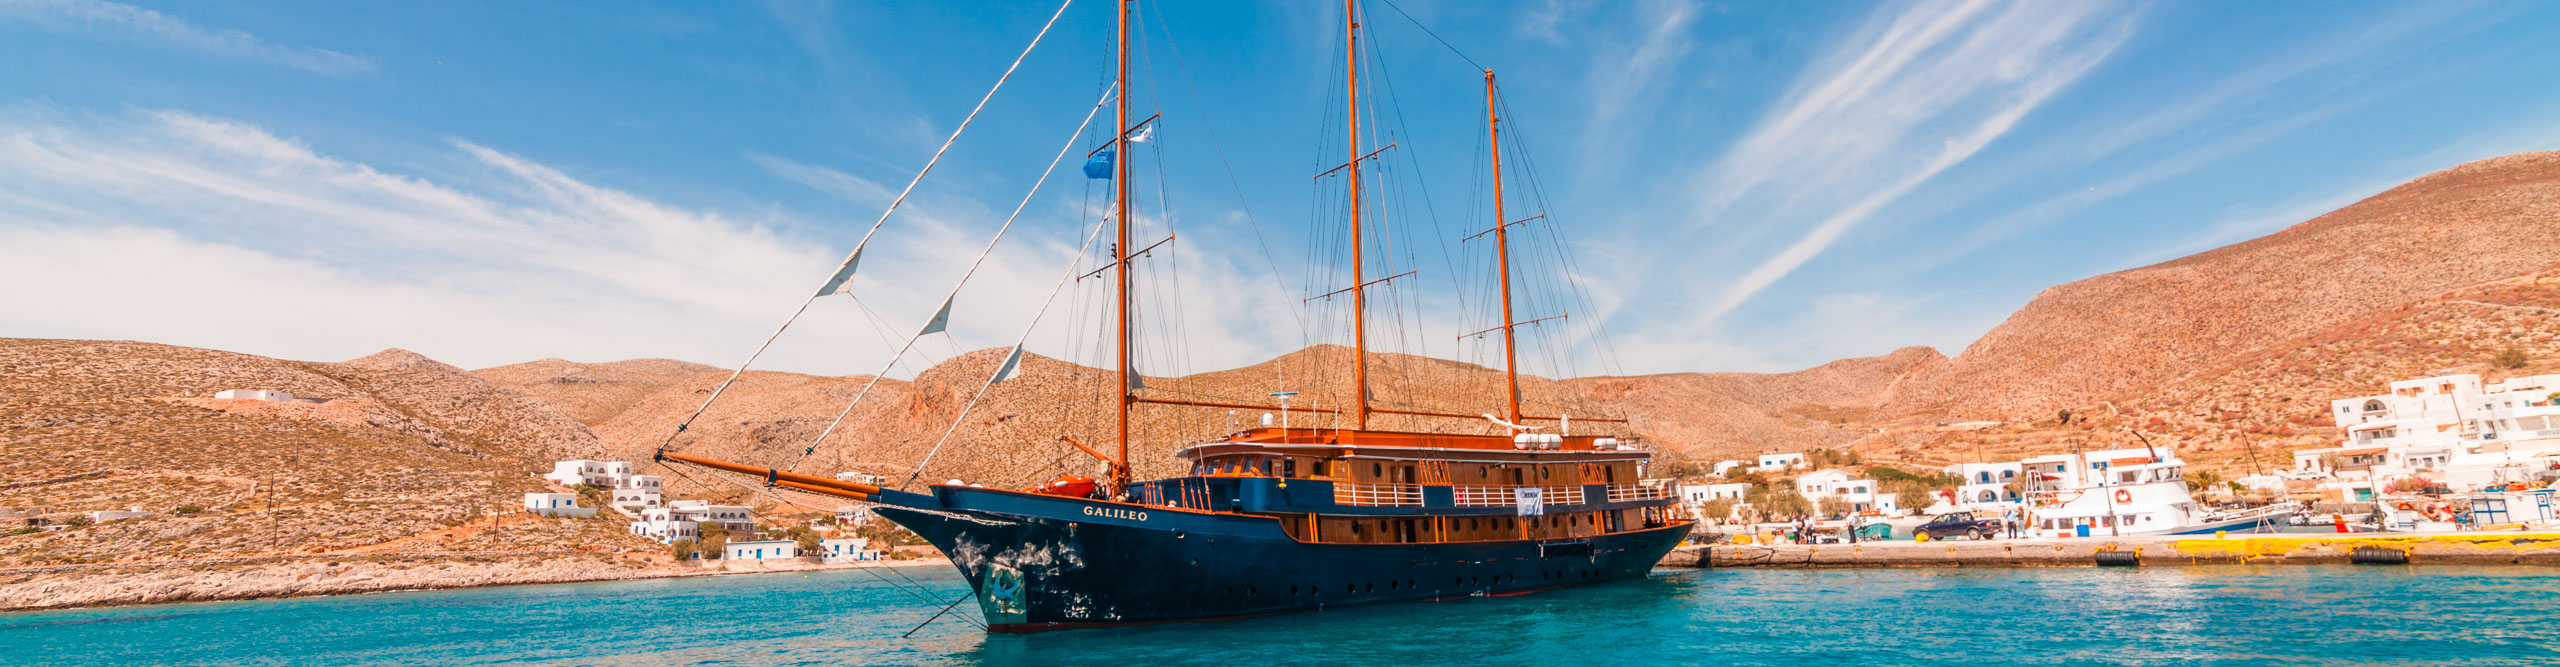 Large old style sailing boat in the harbour in Greece